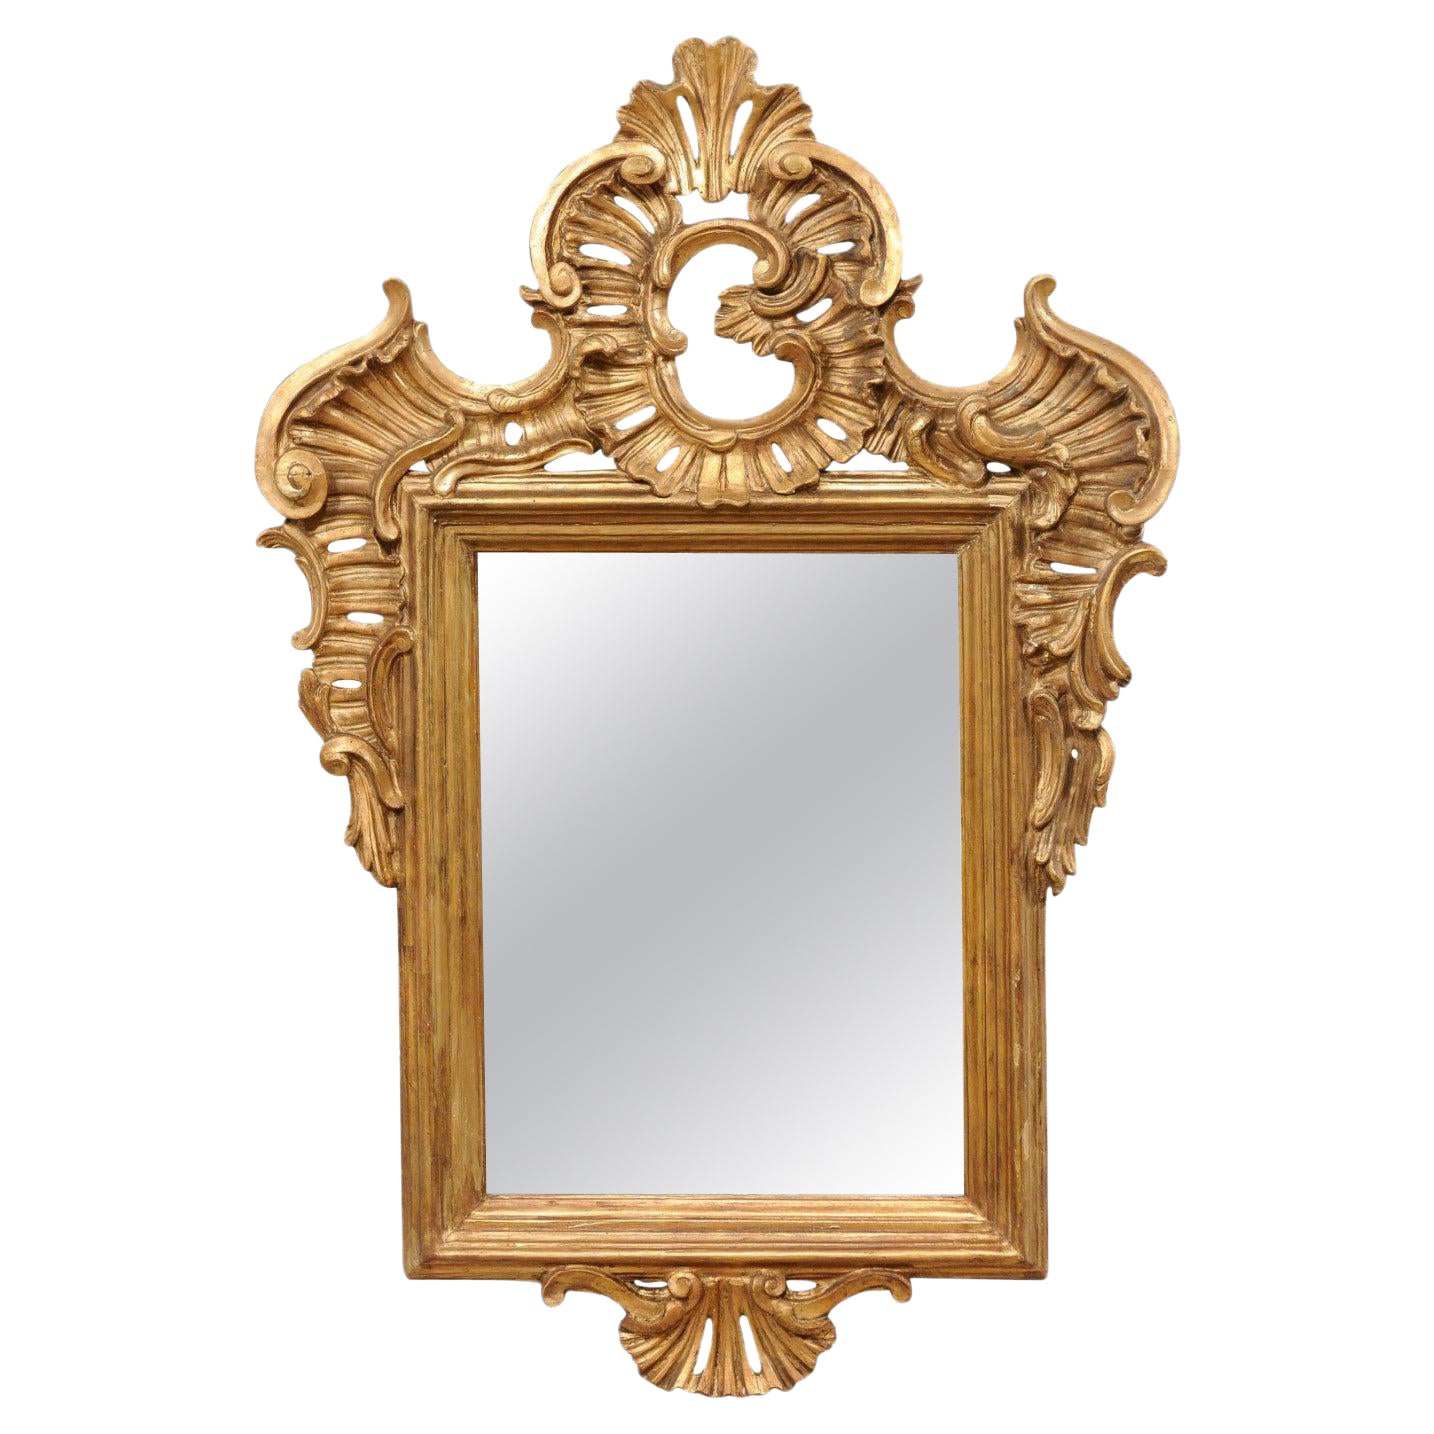 Continental Baroque Gilt Mirror w/Beautiful Pierce-Carved Crest, Late 18th C. For Sale